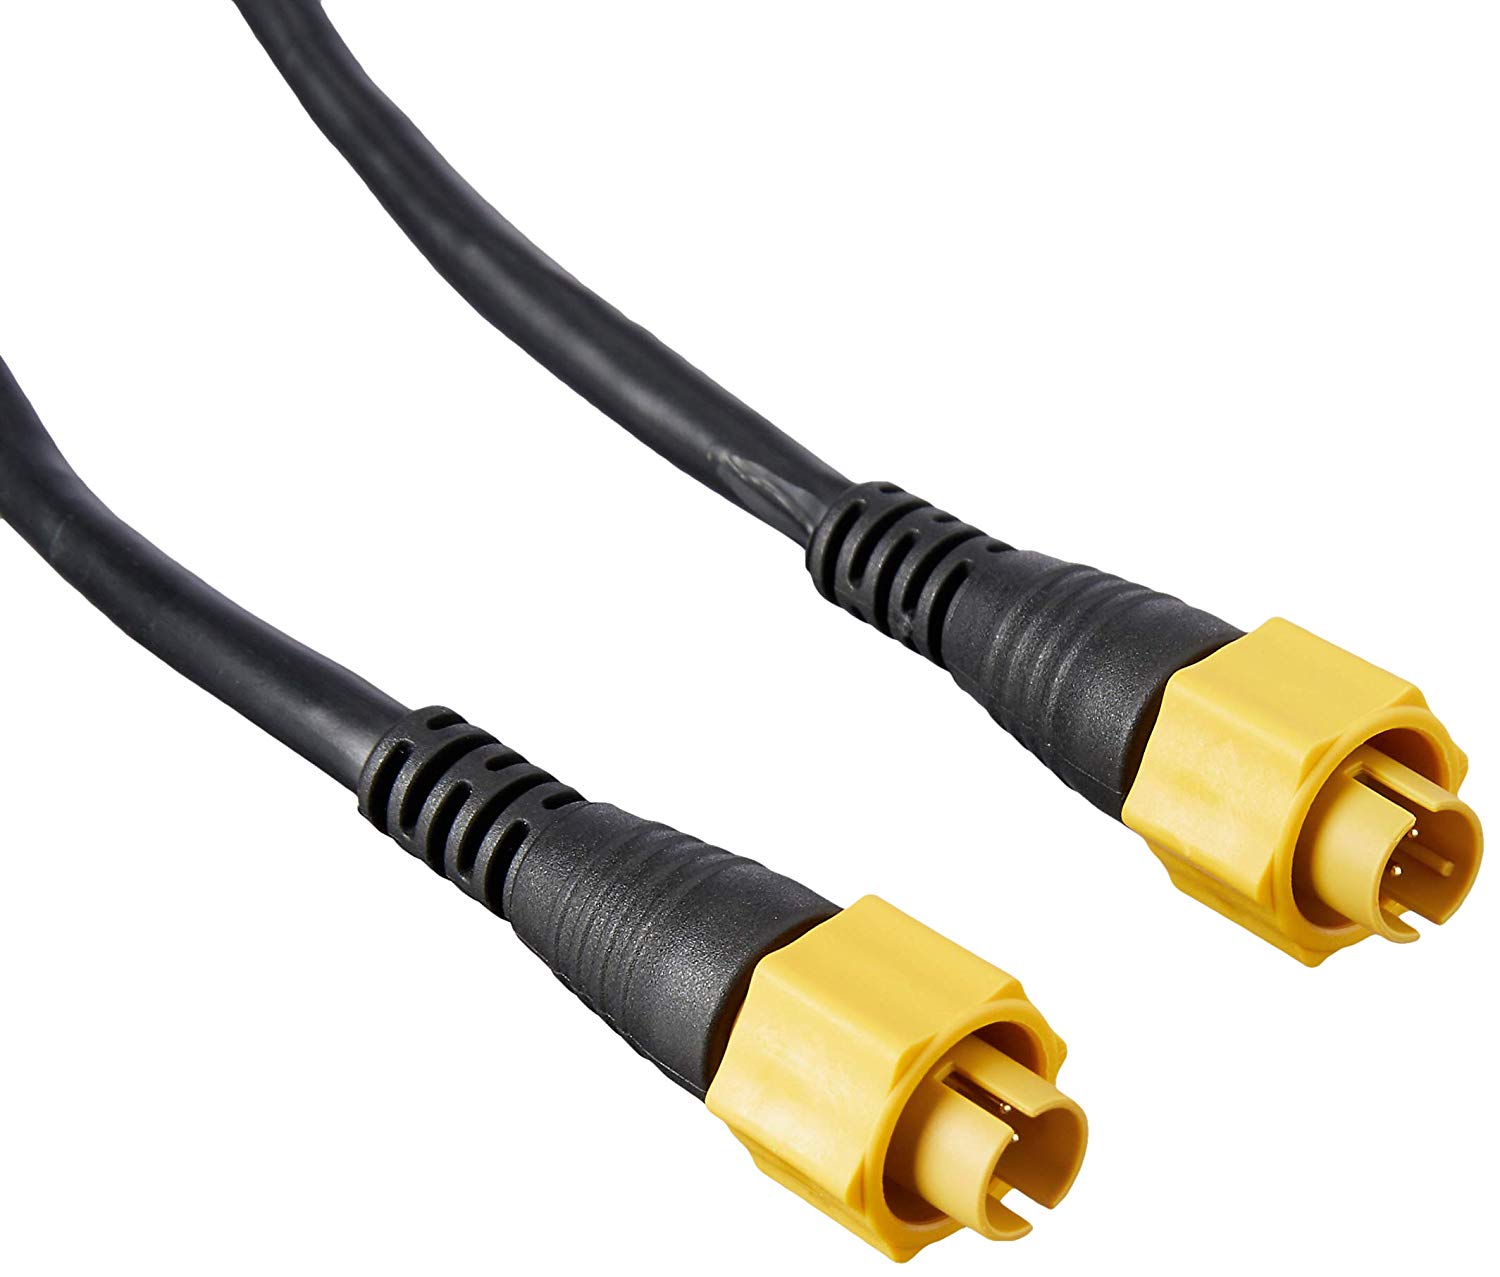 LOWRANCE 000-0127-30 ETHEXT25YL 25' Ethernet Cable